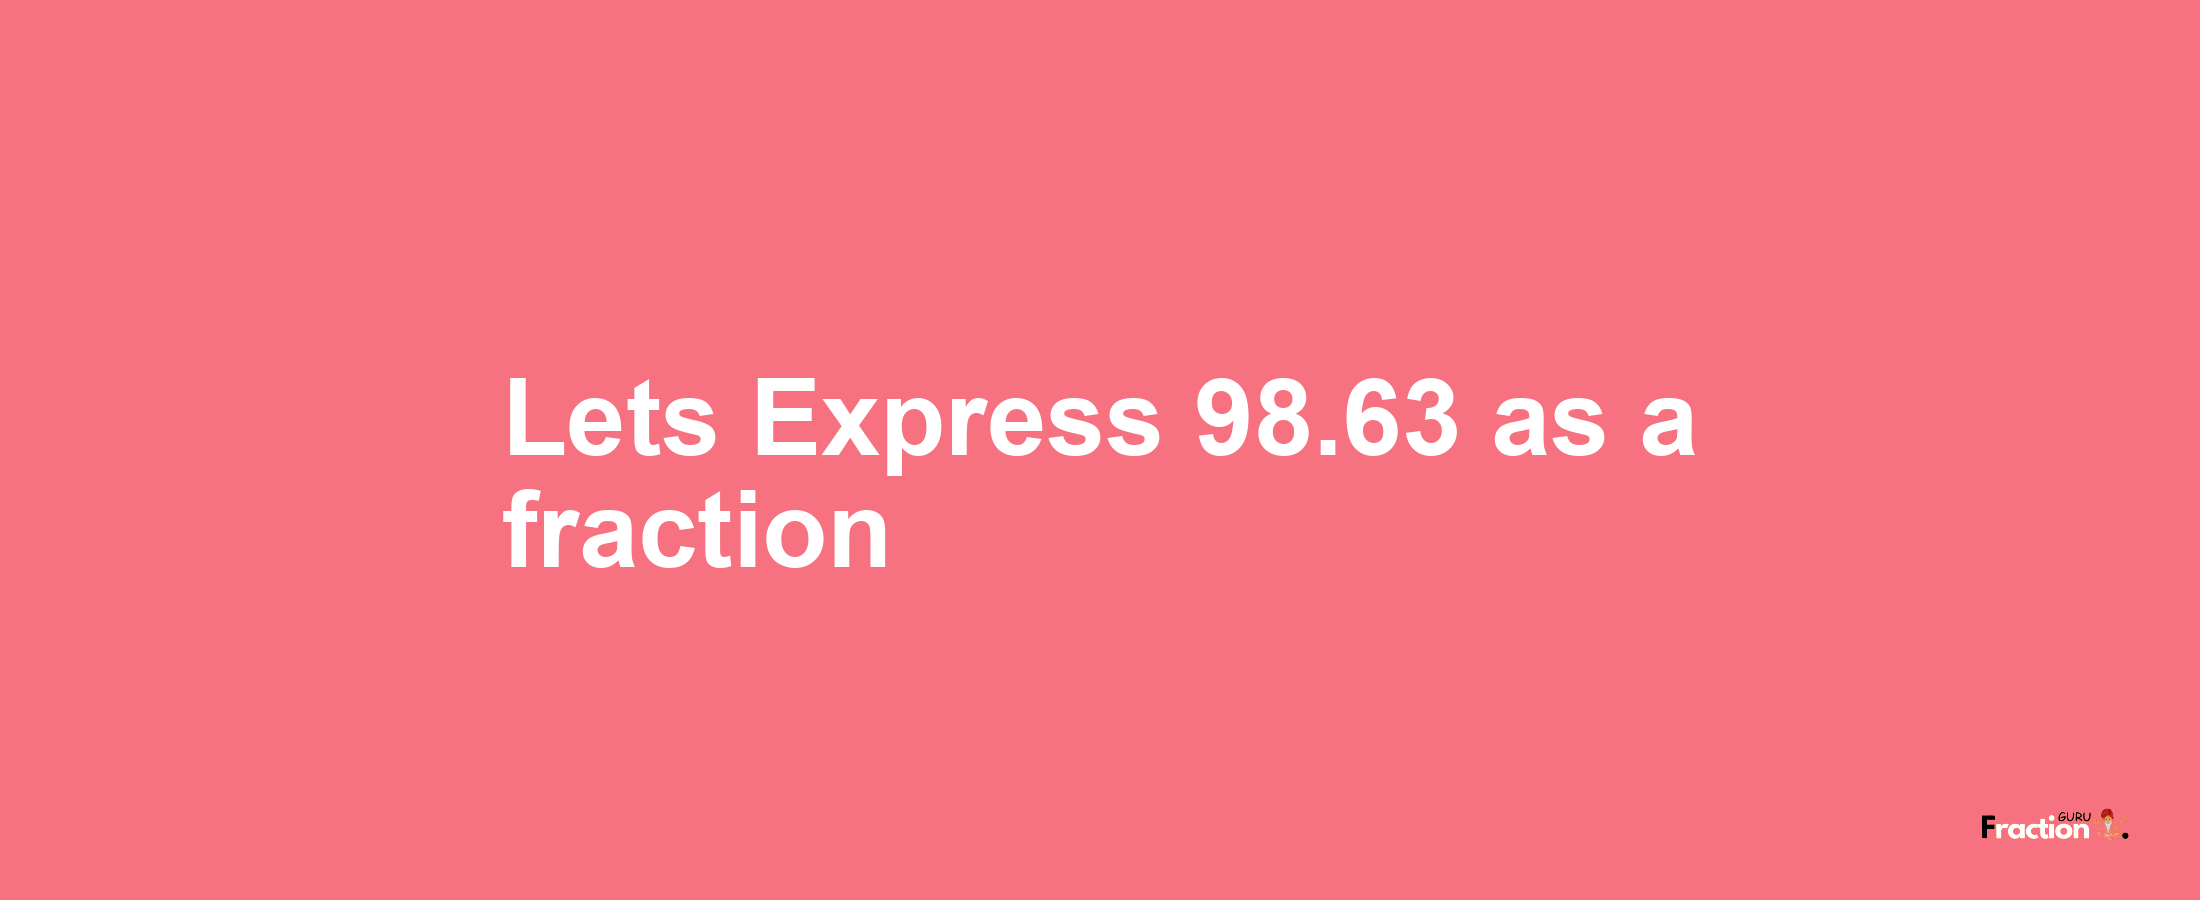 Lets Express 98.63 as afraction